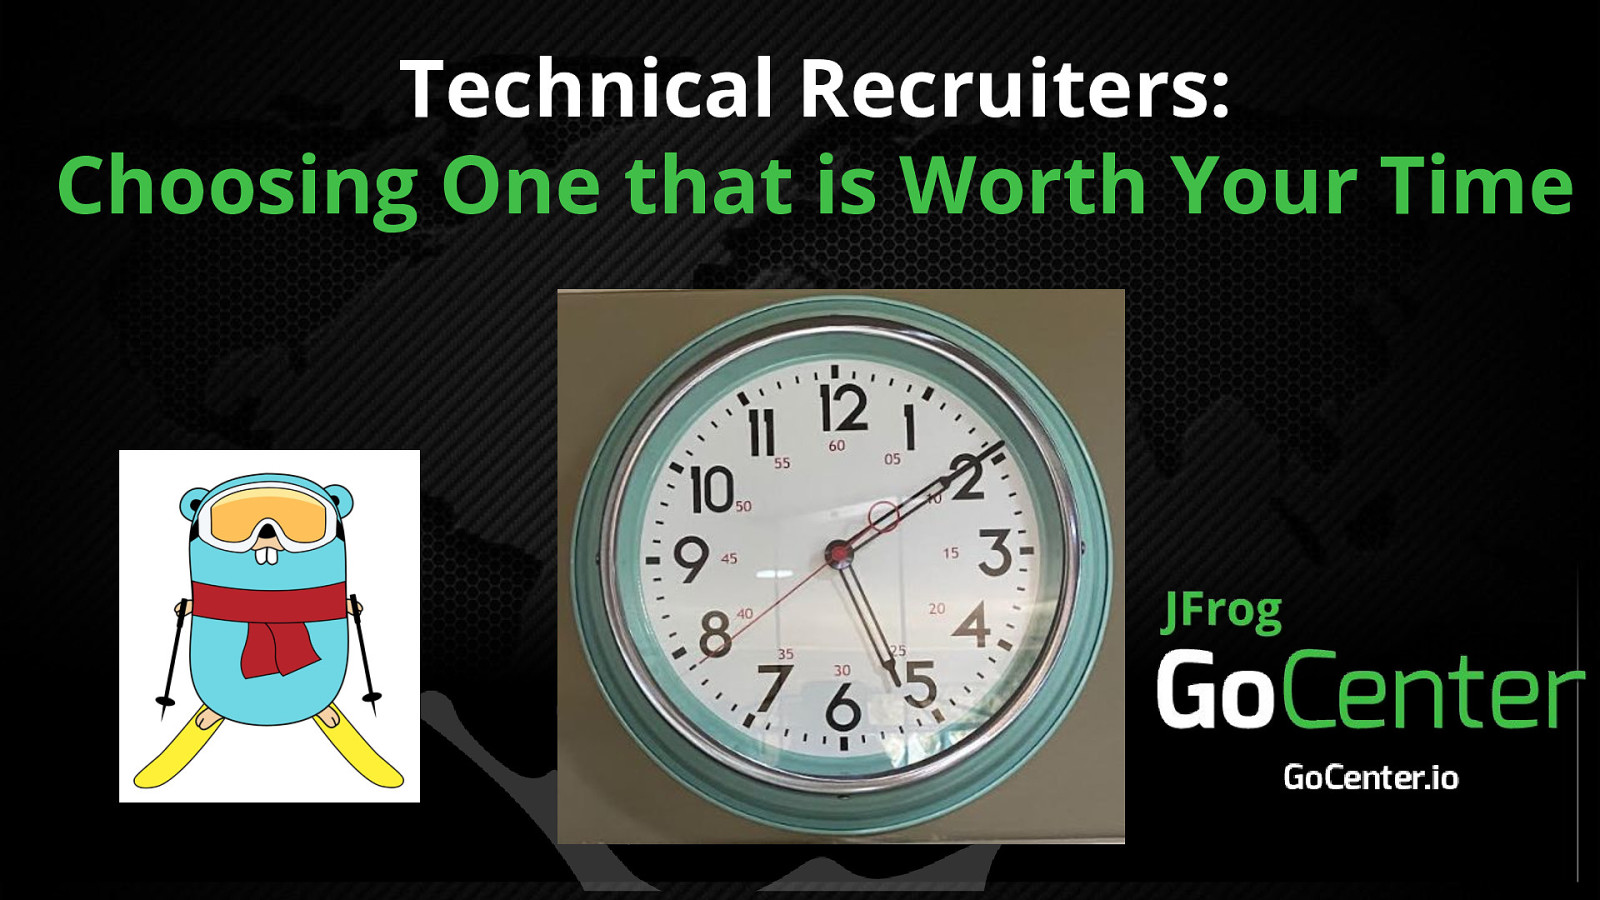 Technical Recruiters: Choosing one that’s Worth Your Time